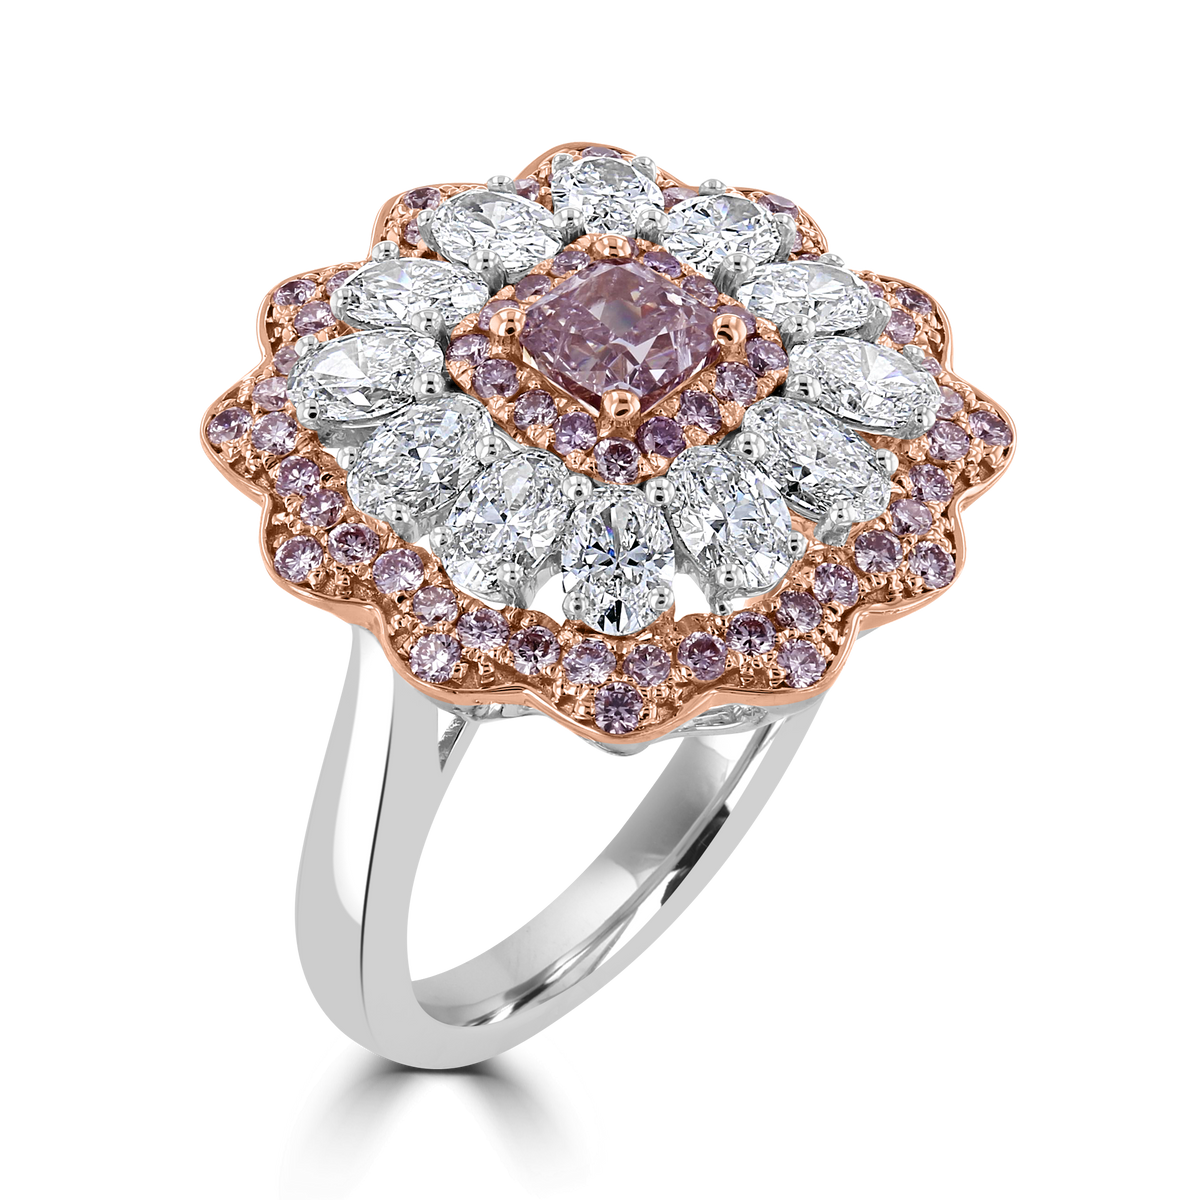 JULEVE 3.55 CARAT TOTAL WEIGHT FANCY PURPLE PINK CENTER WITH WHITE & PINK DIAMOND HALO RING